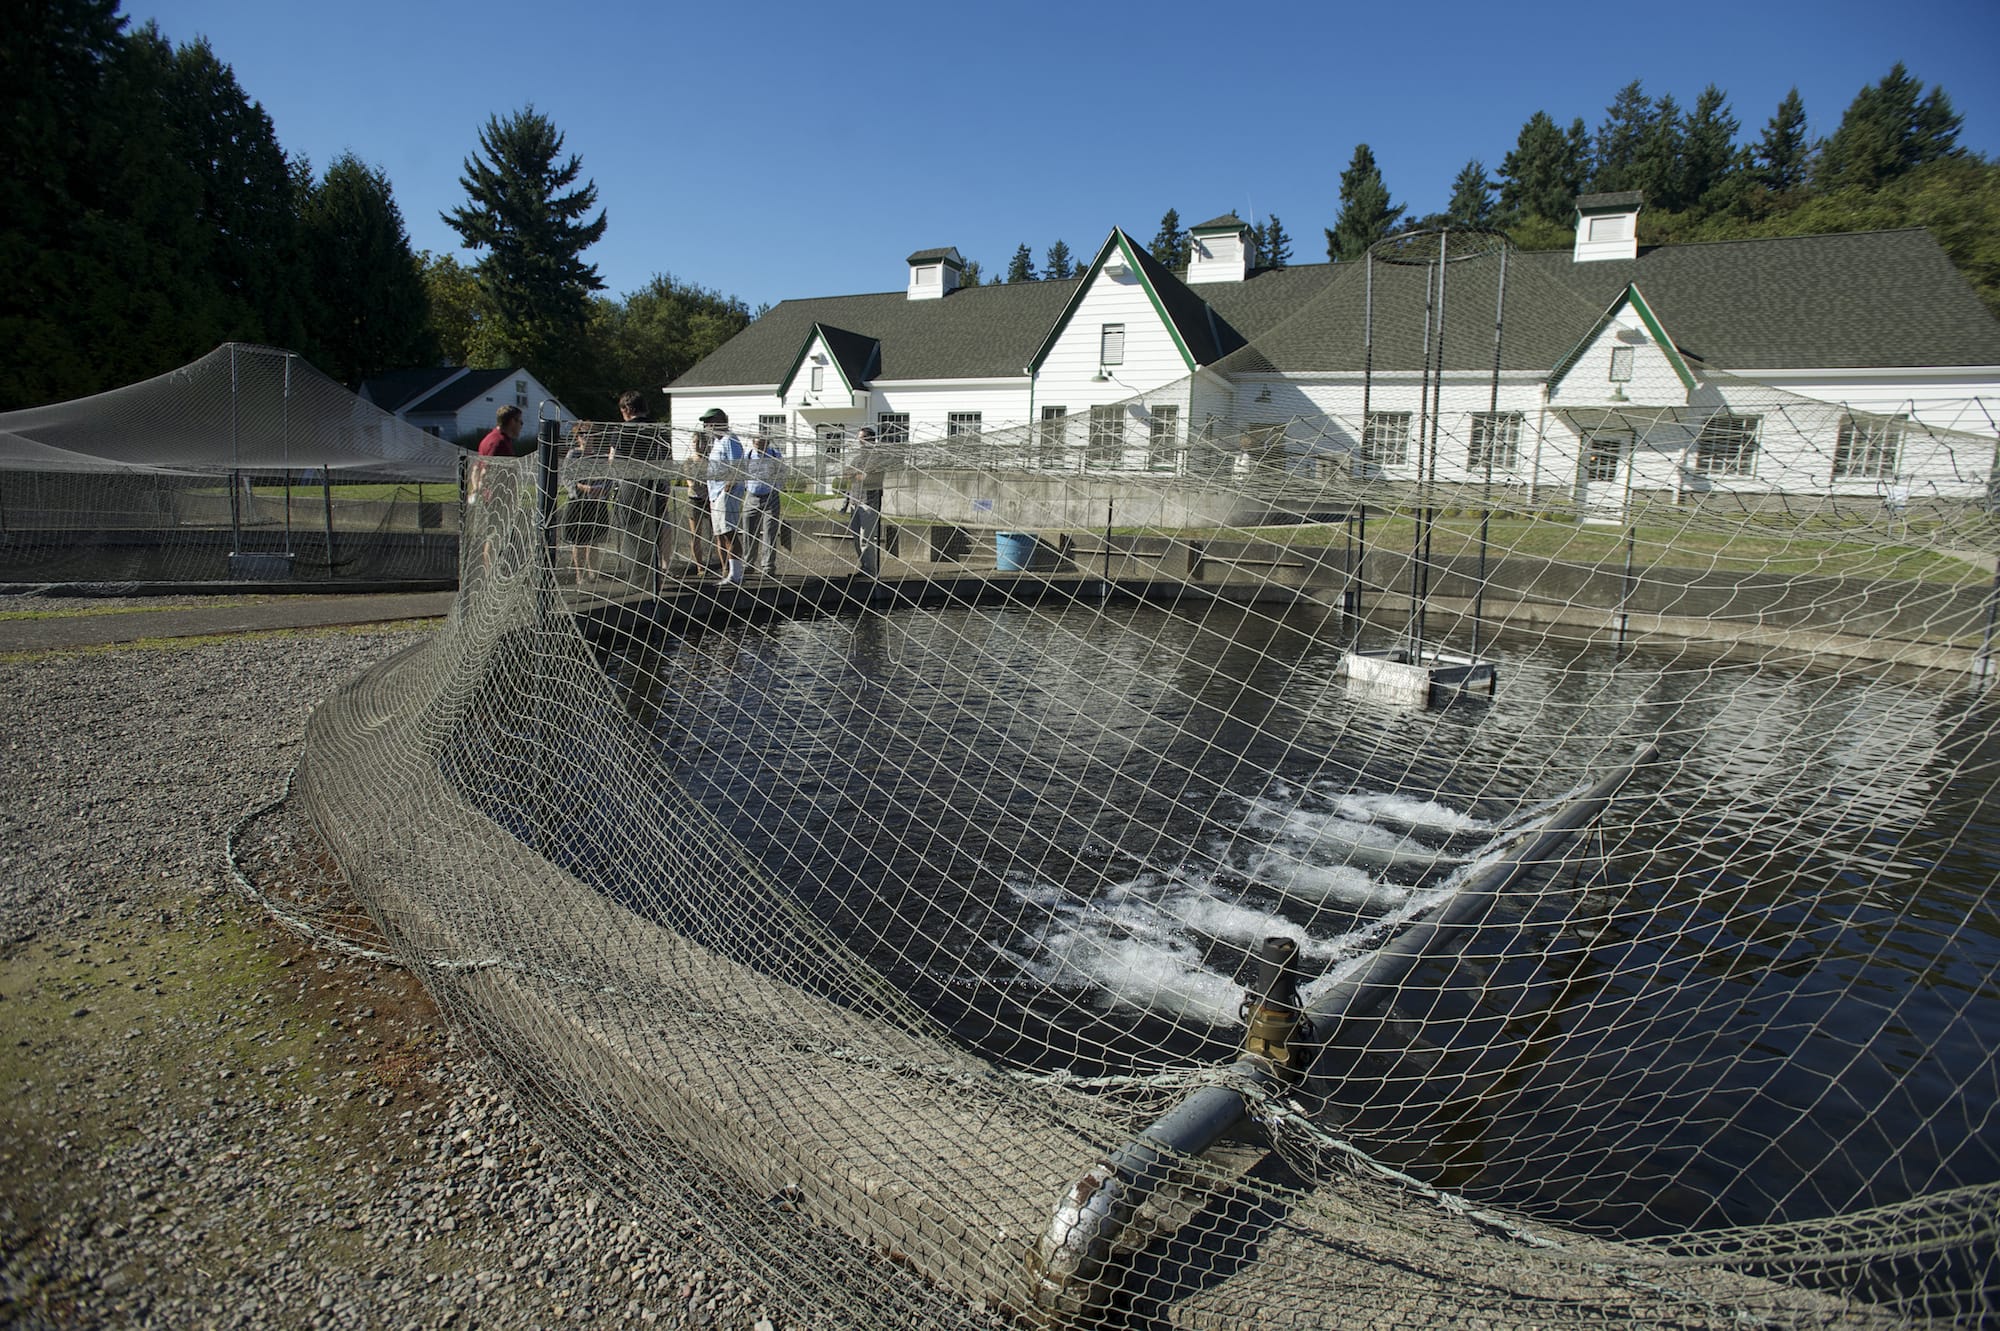 Tours are given of the Columbia Springs Fish Hatchery.